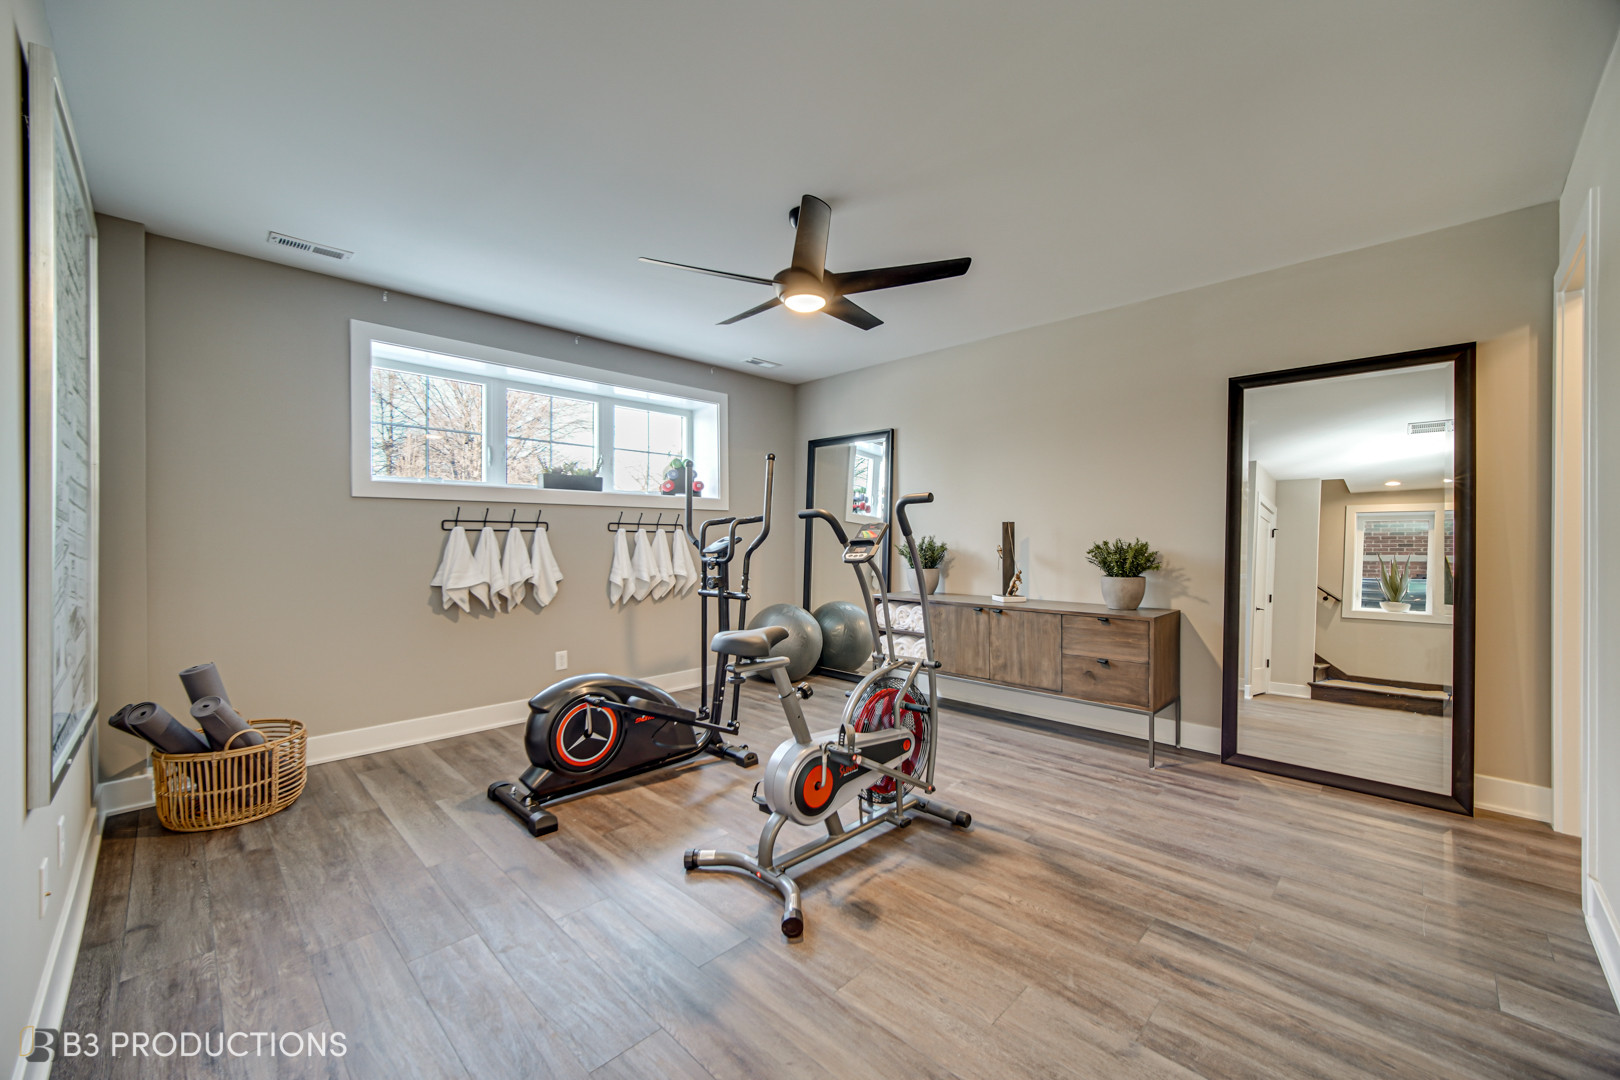 Home Gym Design Ideas Pictures